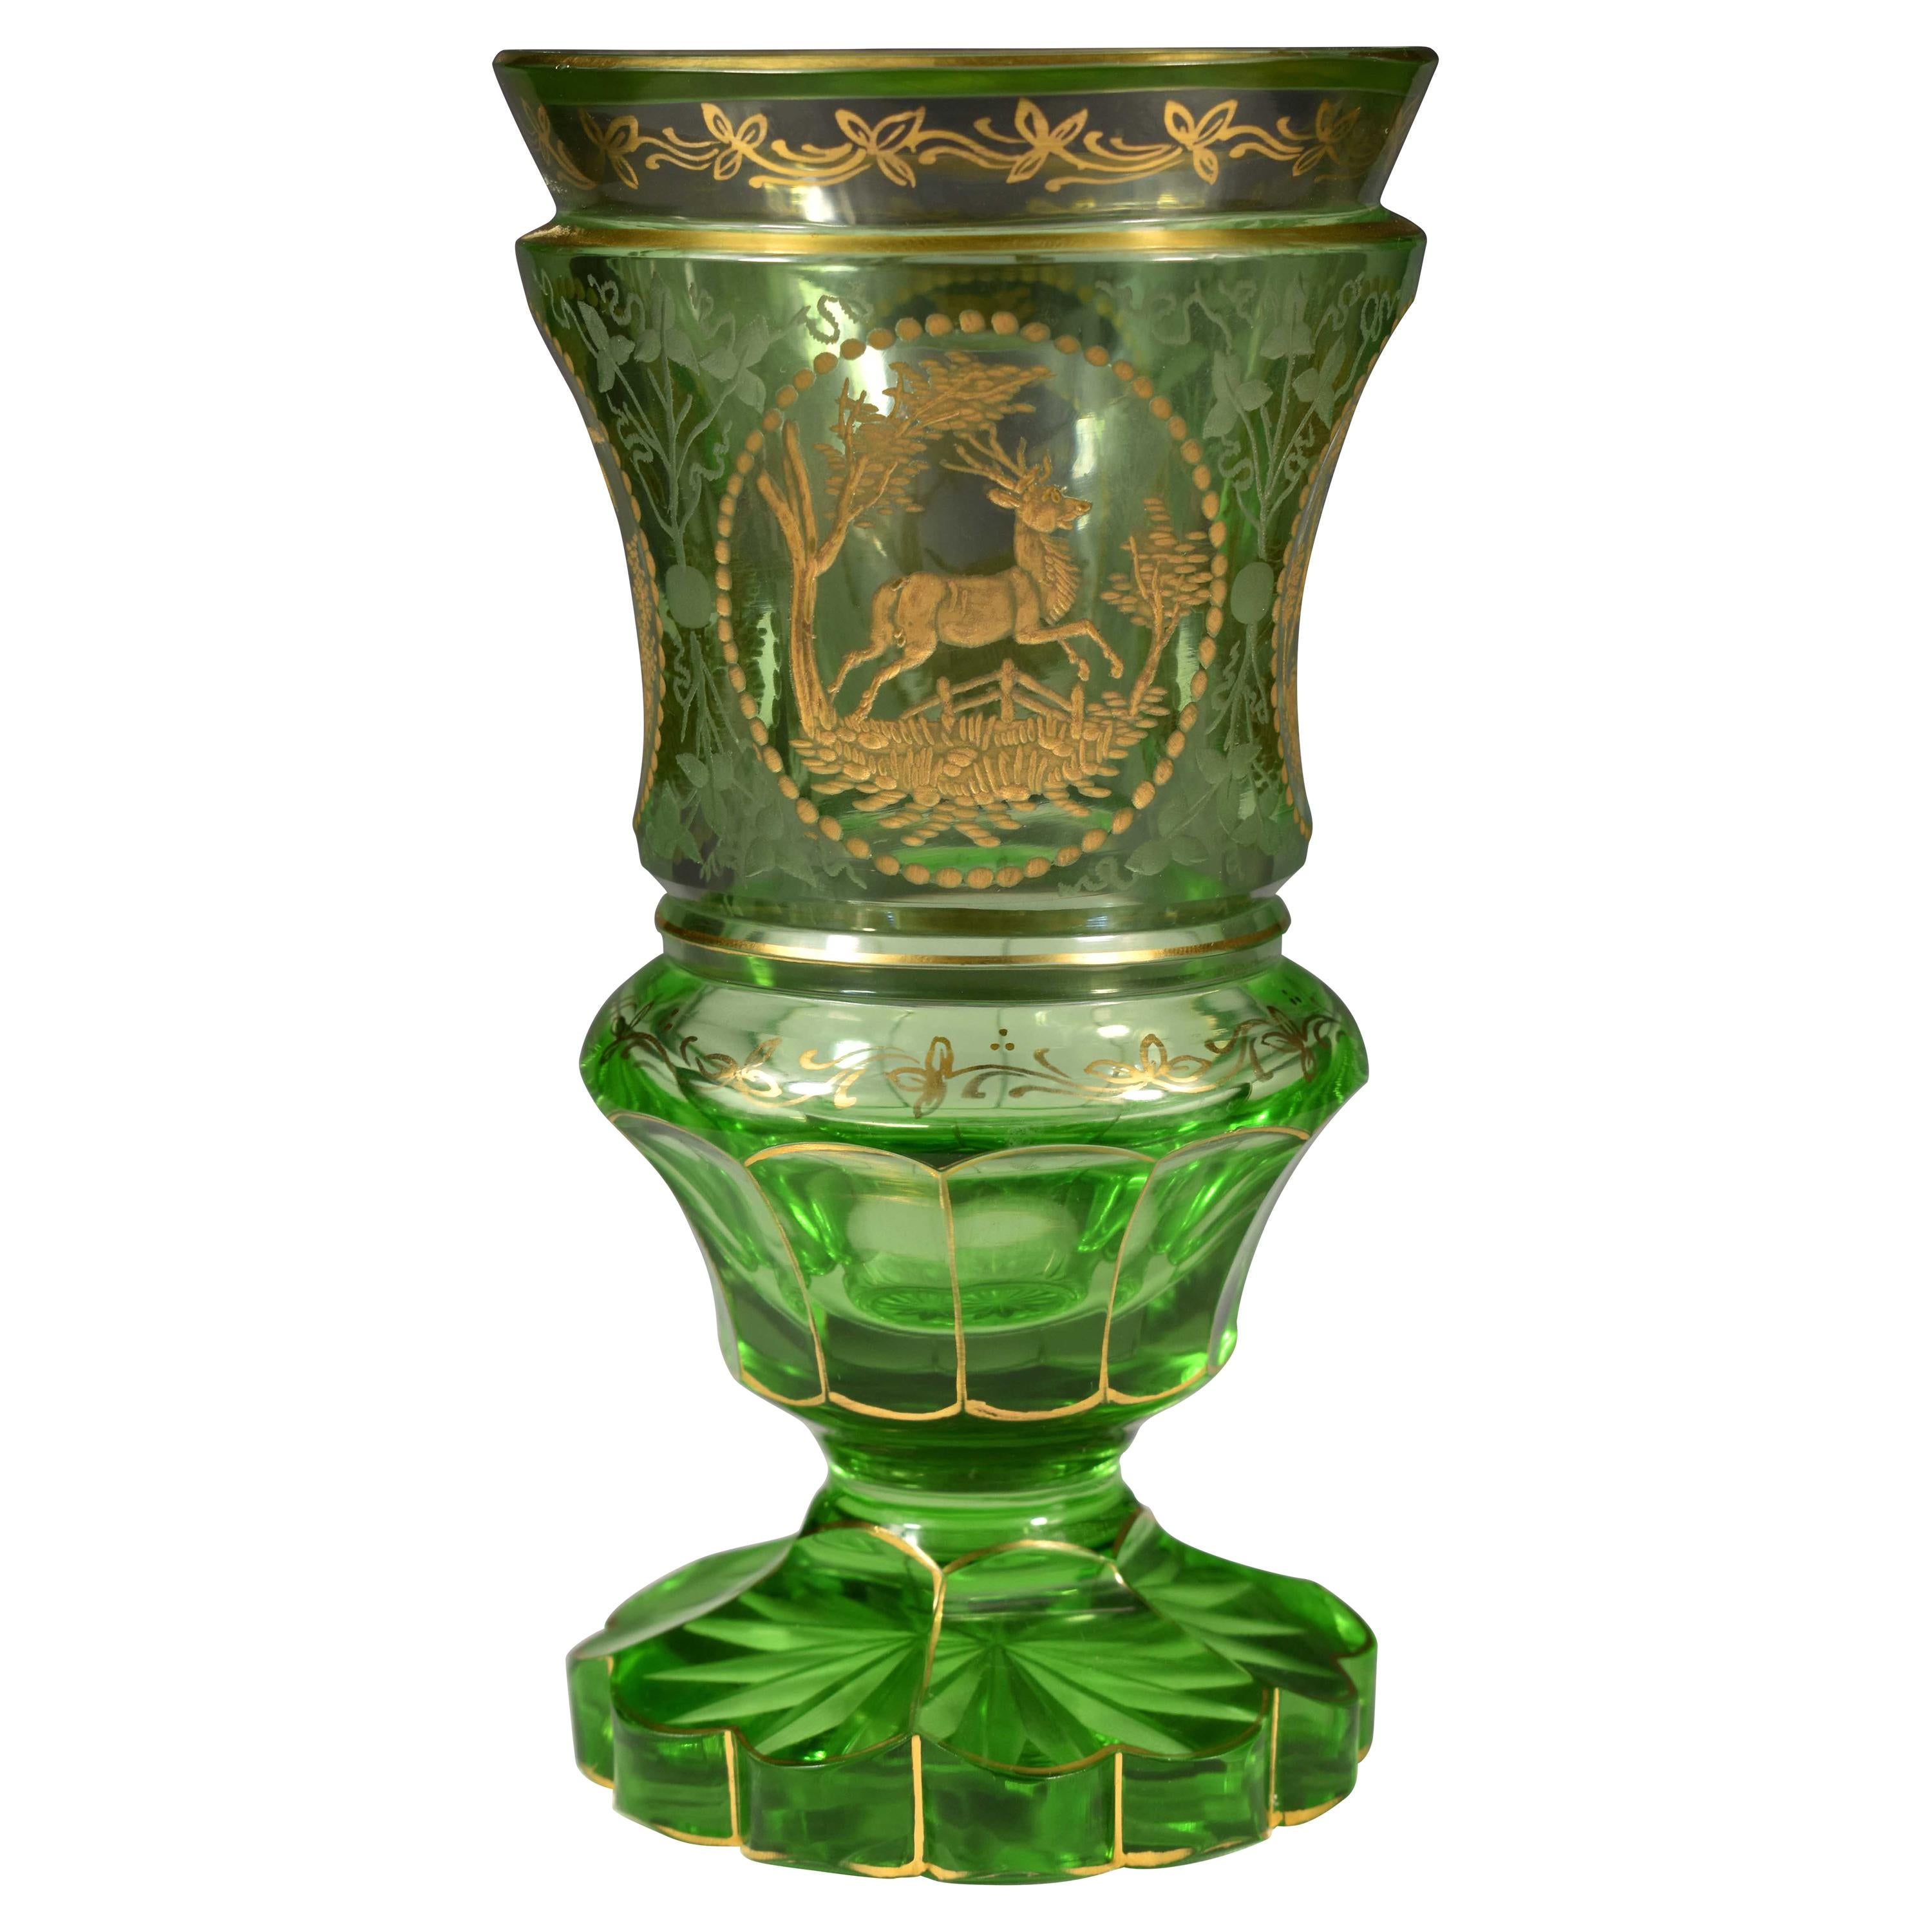 Green Goblet, Bohemian Glass, Engraved and Gilded